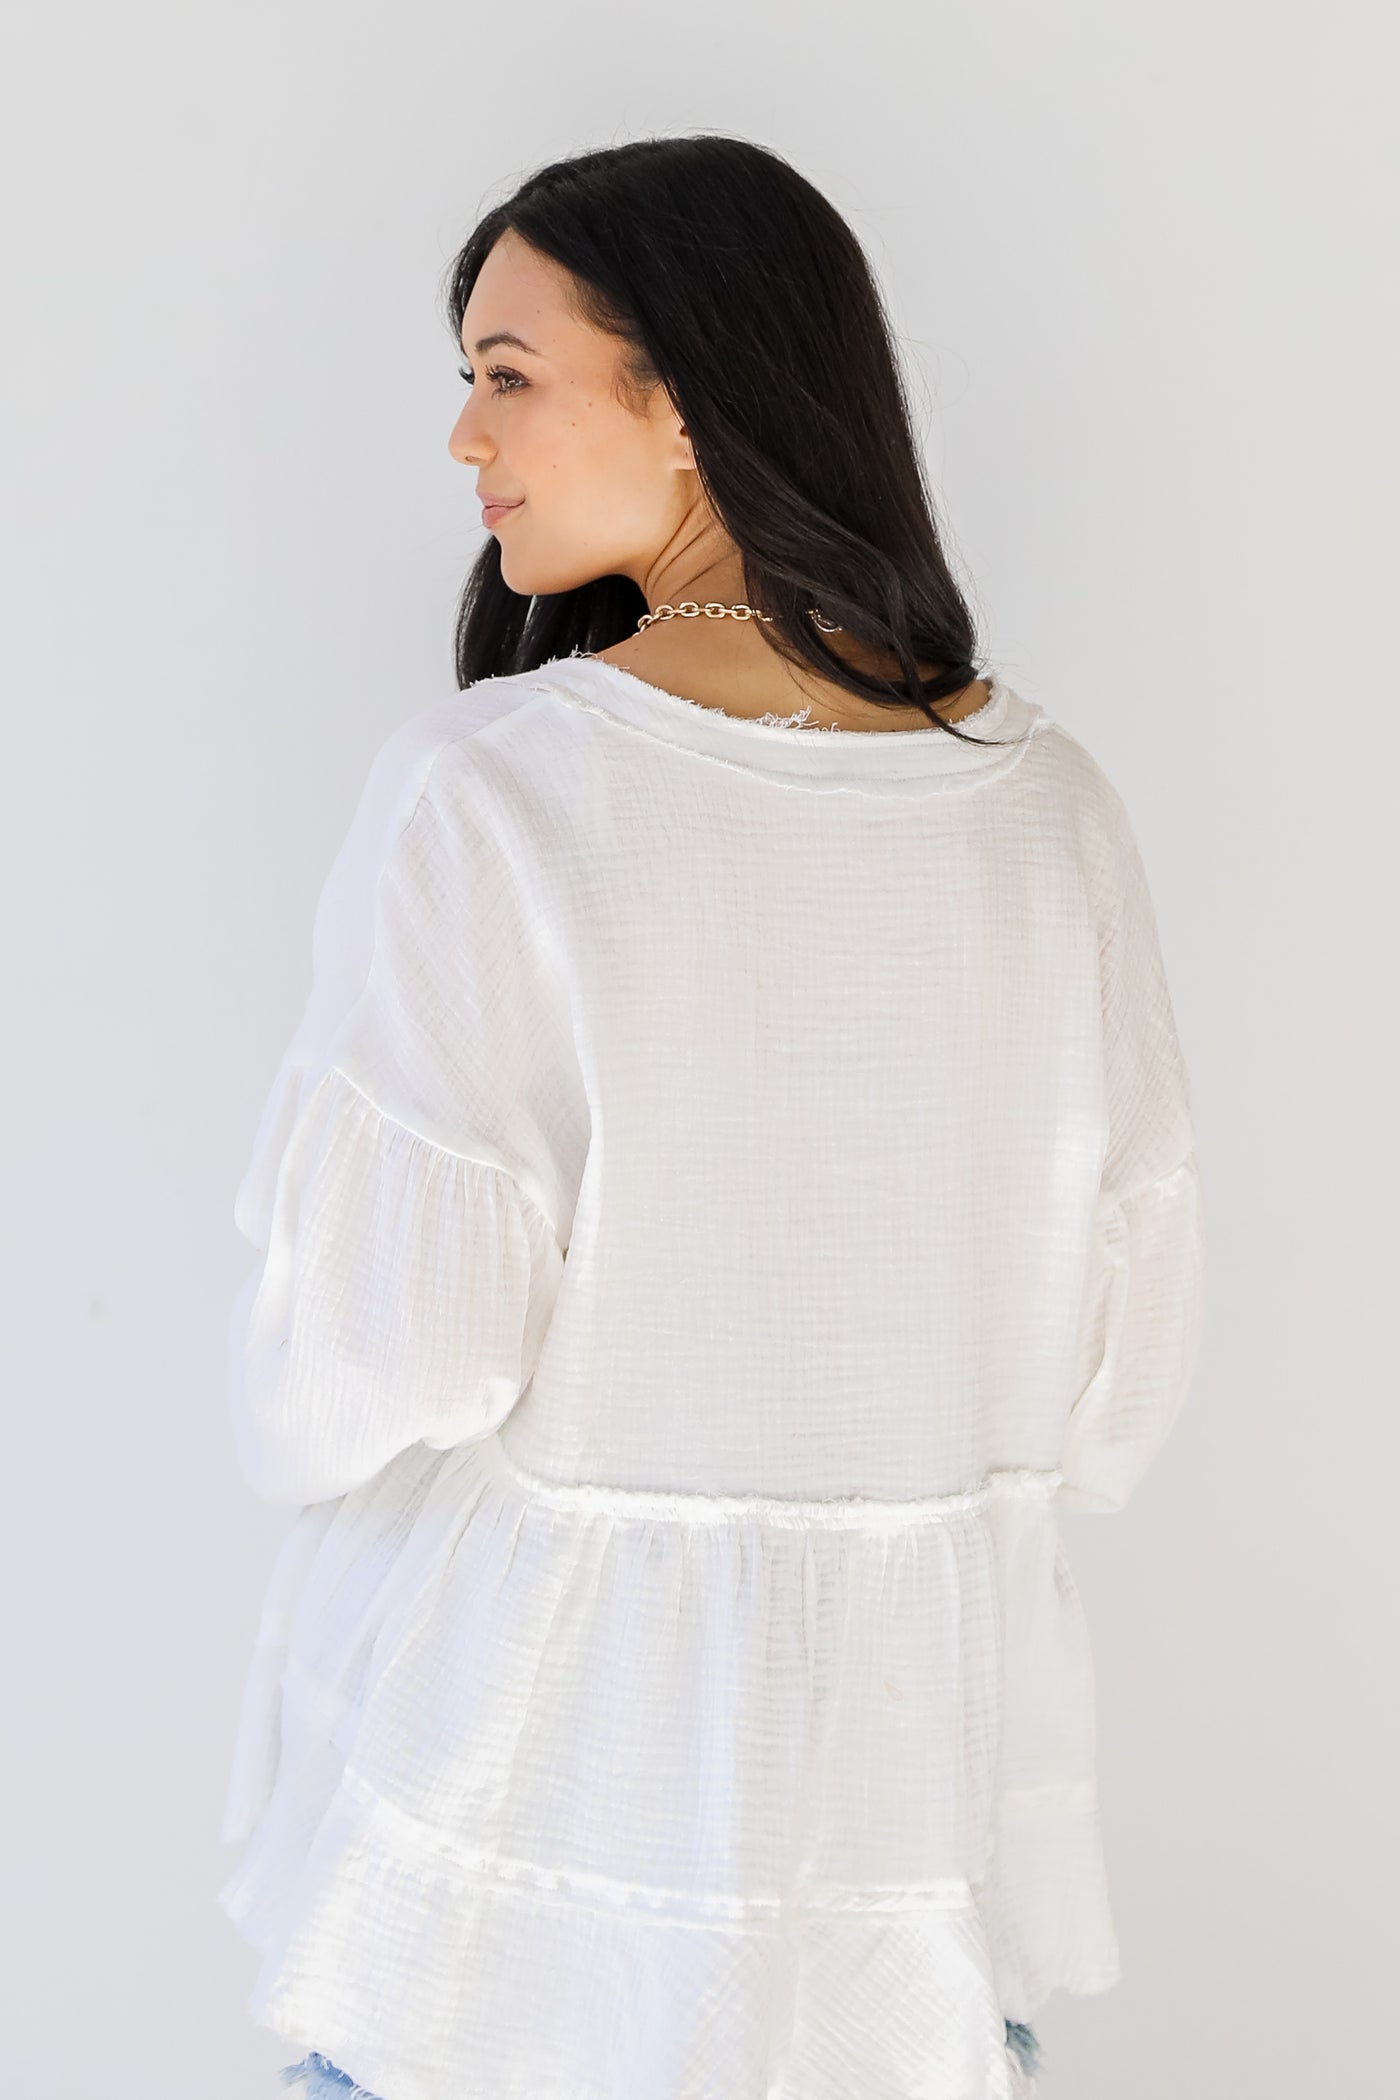 Linen Blouse in white back view